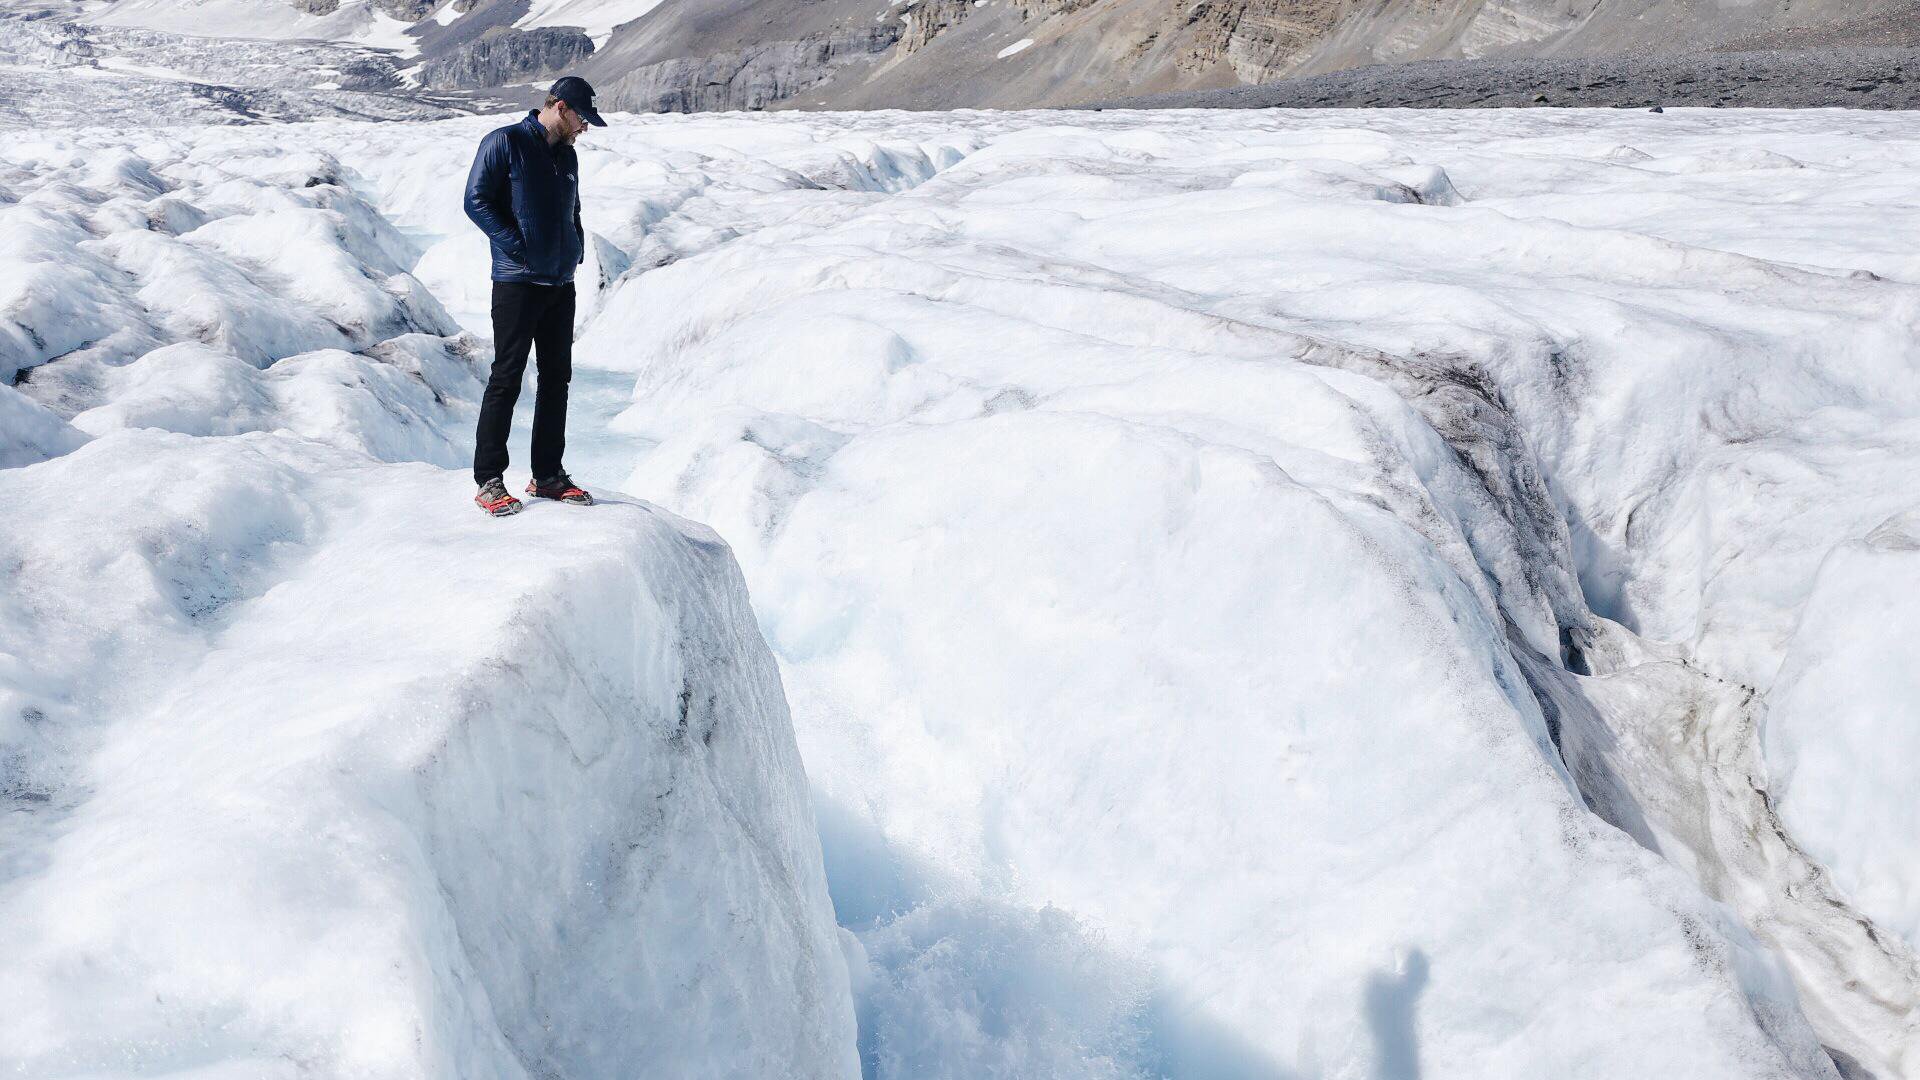 Tyson stands on the Athabasca Glacier in Alberta, Canada, a natural wonder that is retreating at an average rate of ten meters a year.